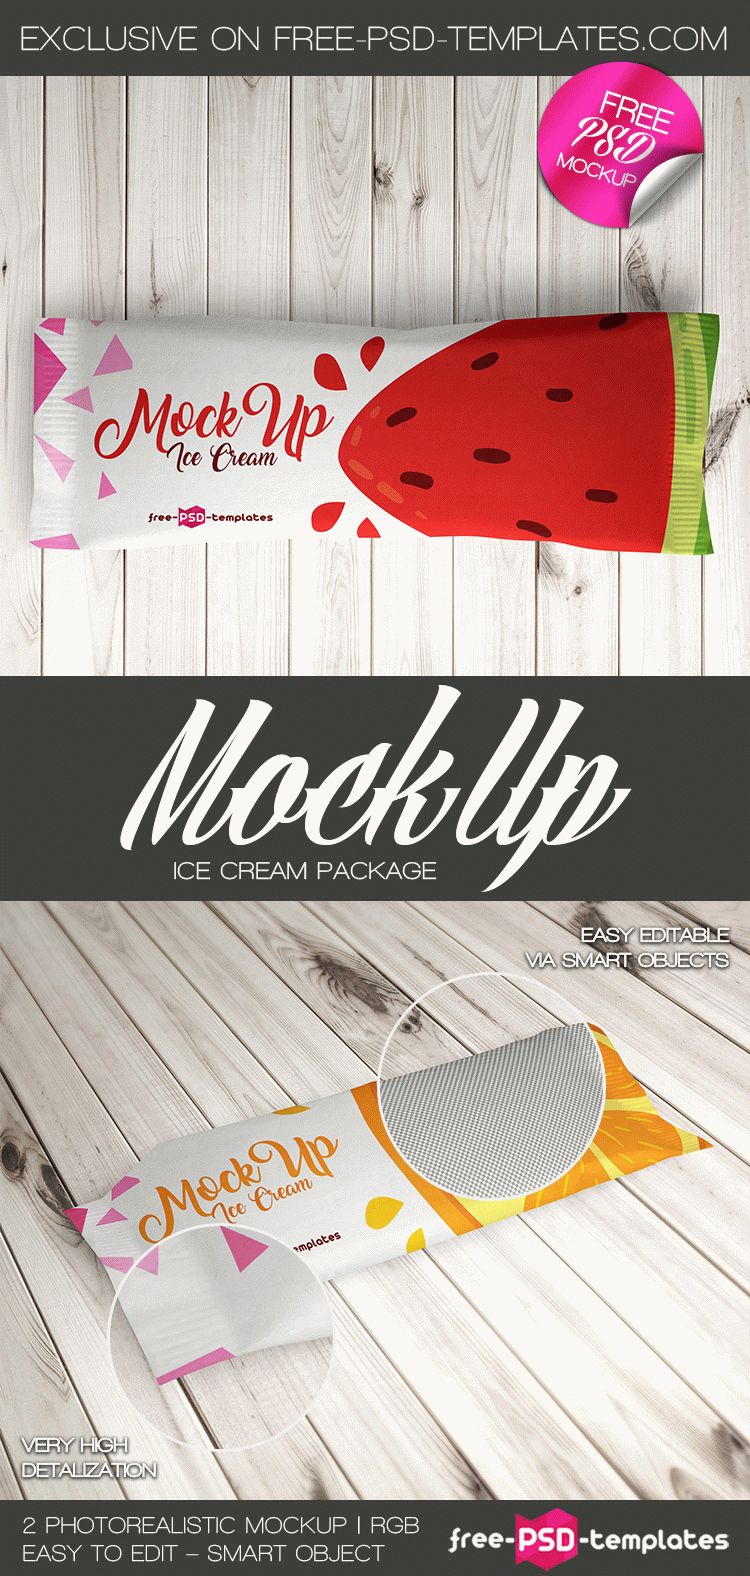 Download 2 Free Ice Cream Package Mock-ups in PSD | Free PSD Templates